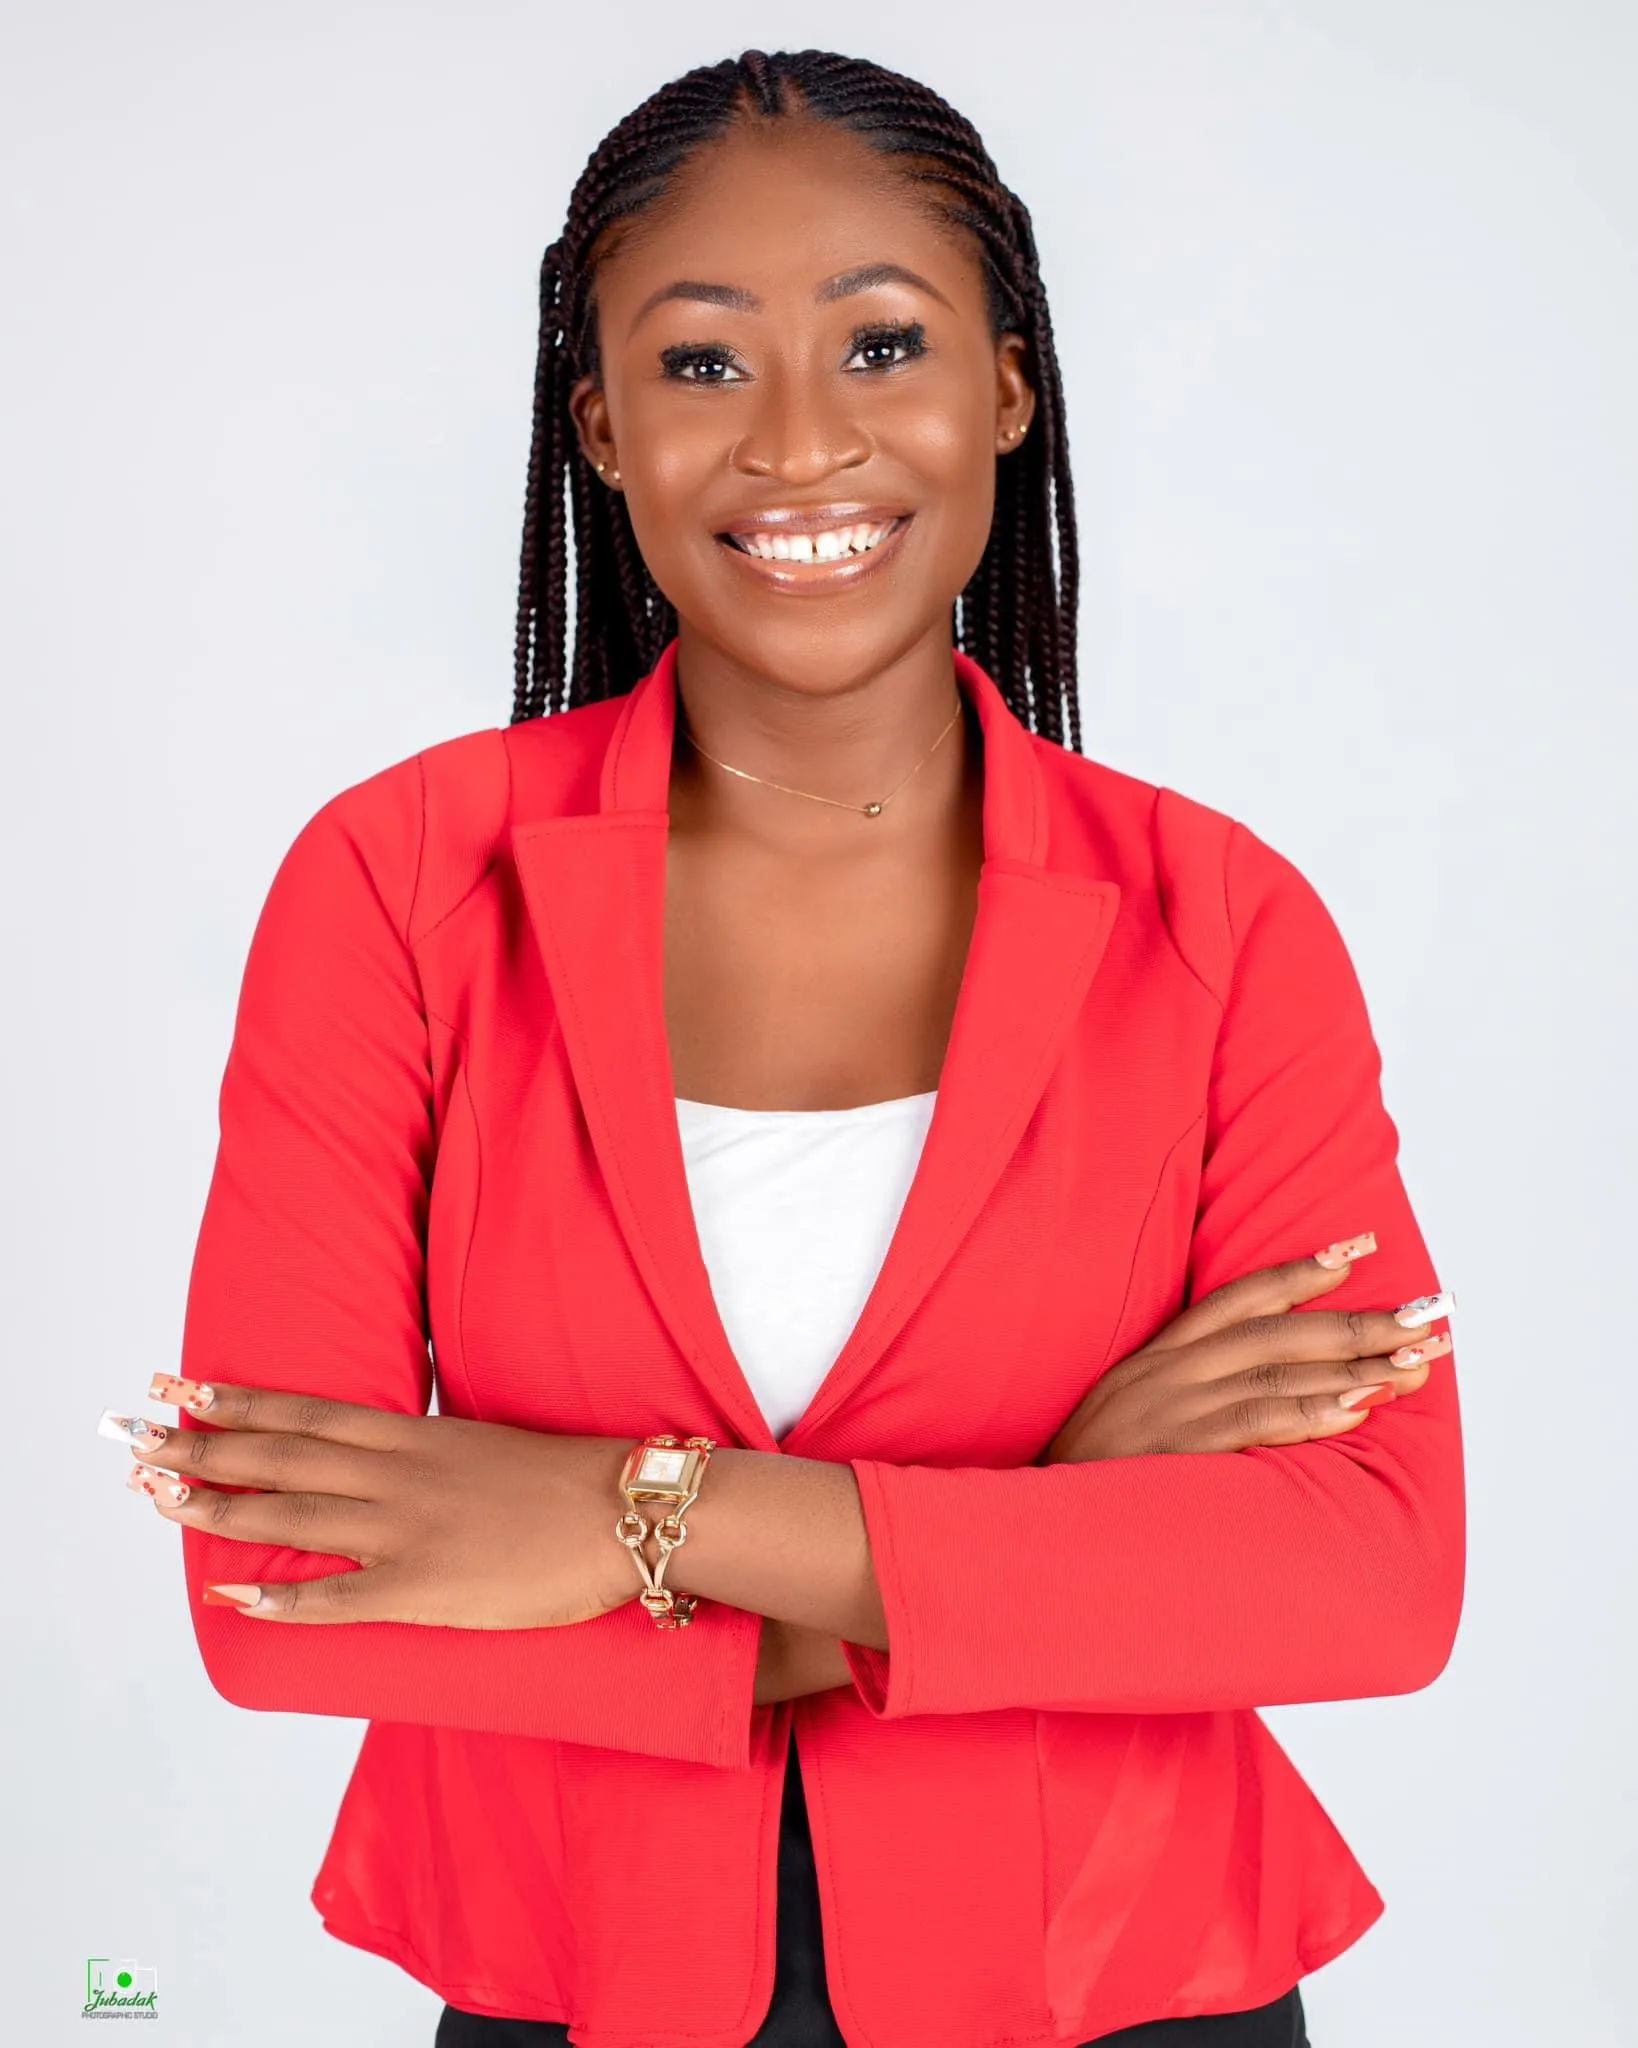 UNICAL Elects First Female SUG President, Blessing Alims